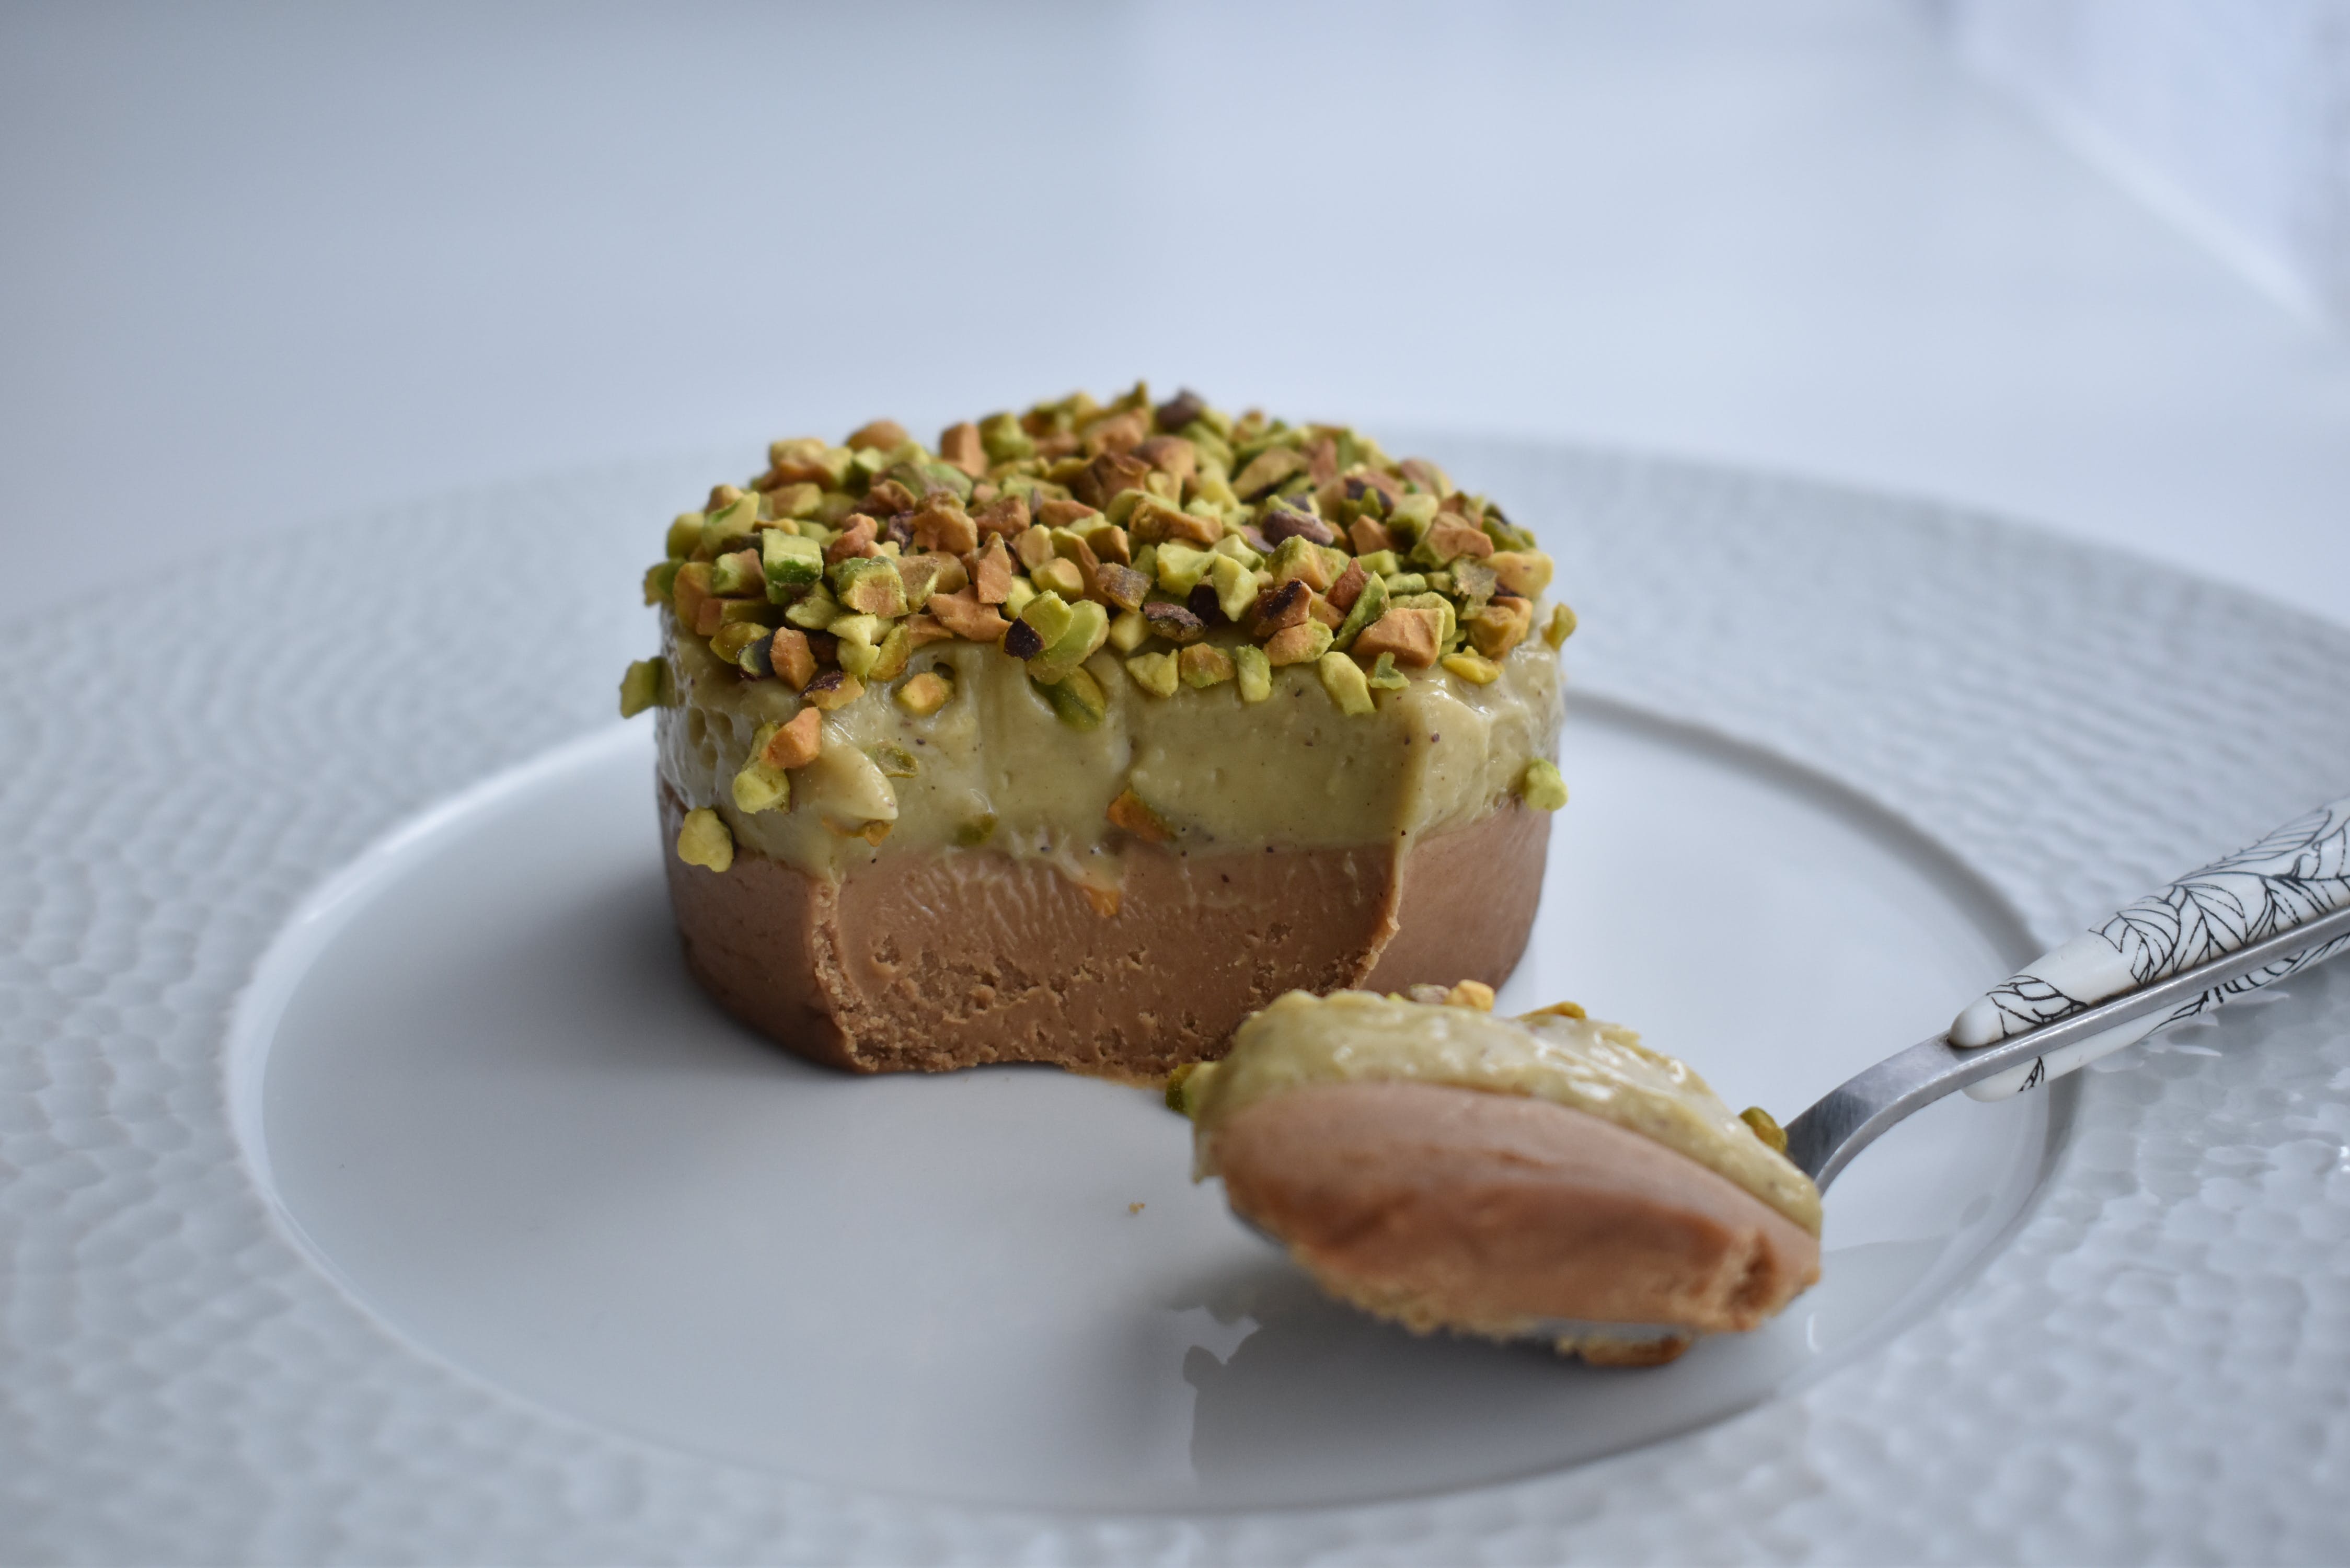 Dessert with Pistachio topping | Source: Pexels